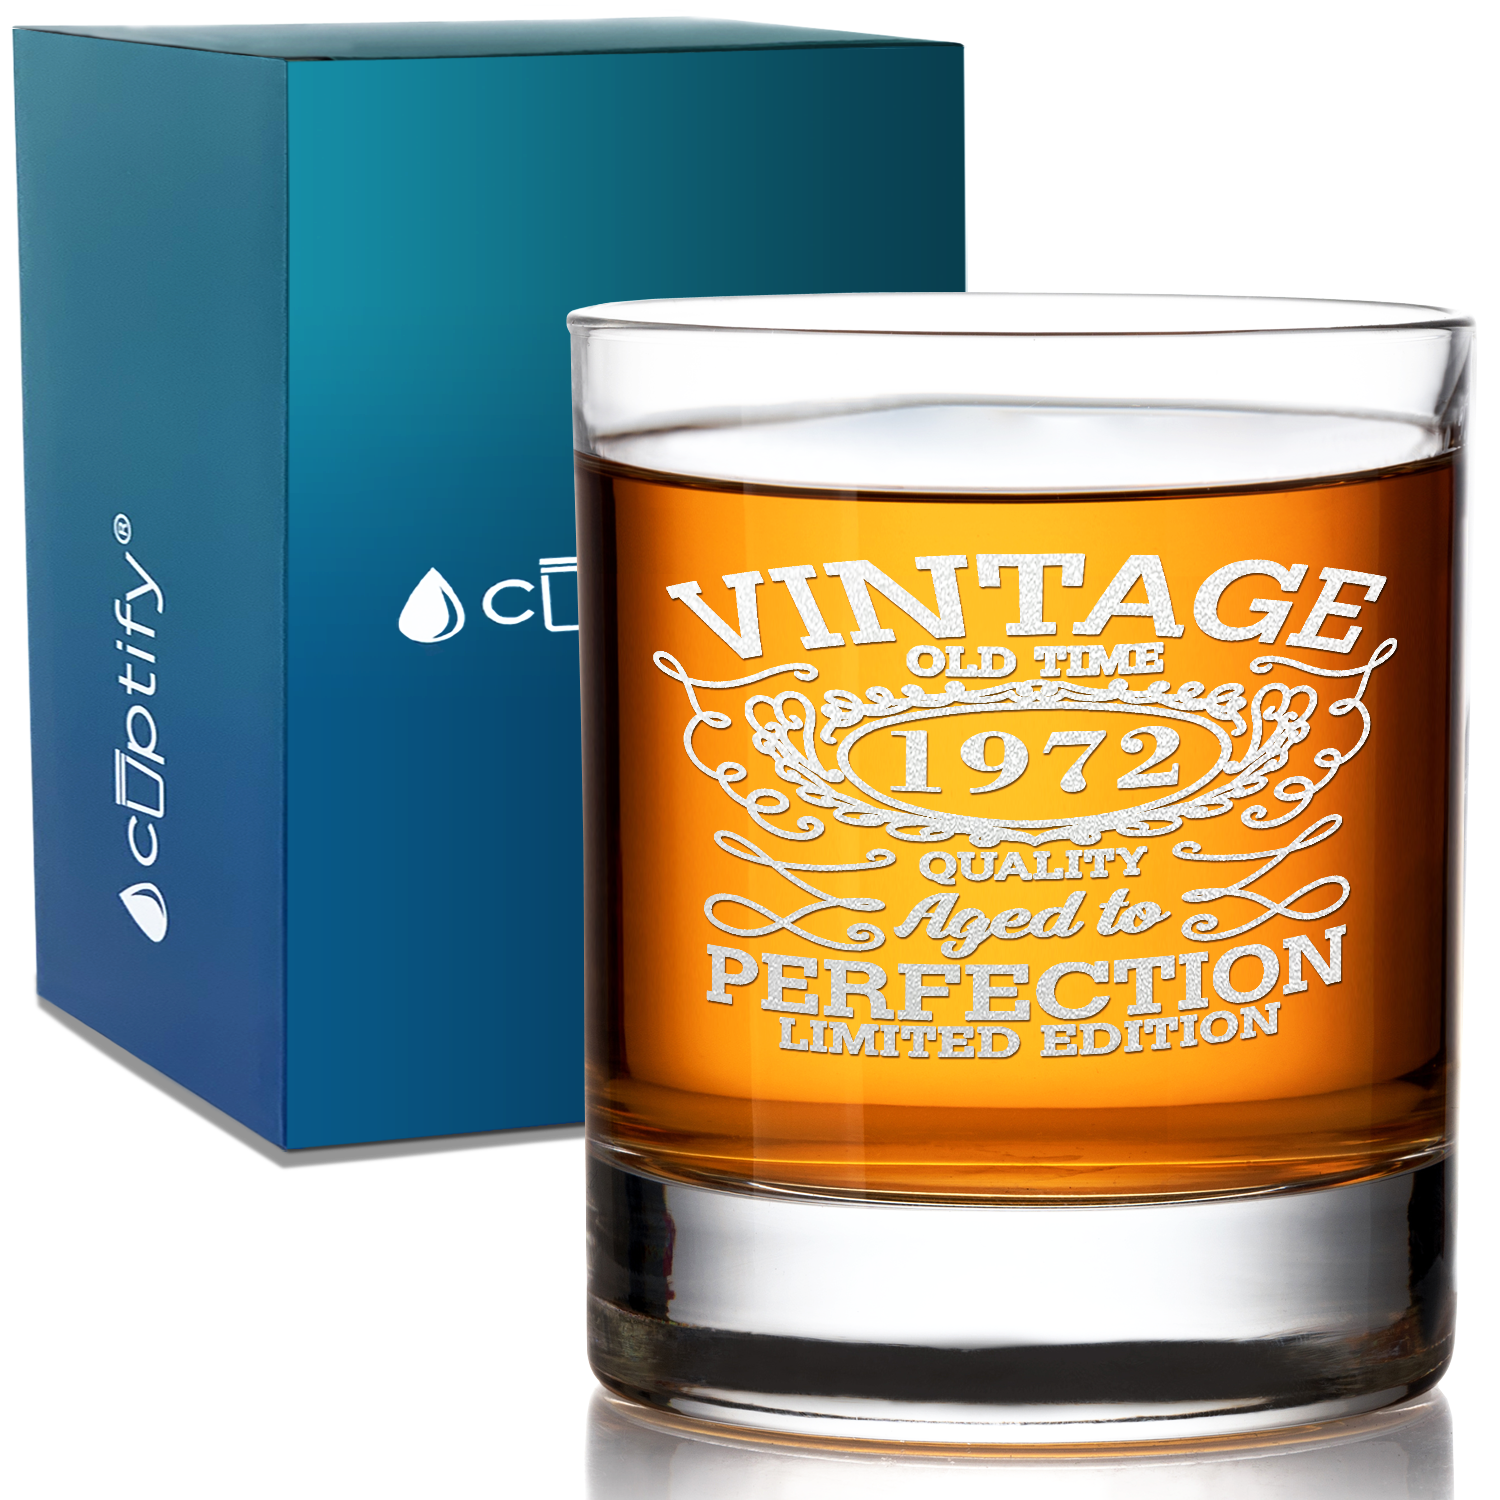 49th Birthday Vintage 49 Years Old Time 1972 Quality Laser Engraved 10.25oz Old Fashion Glass